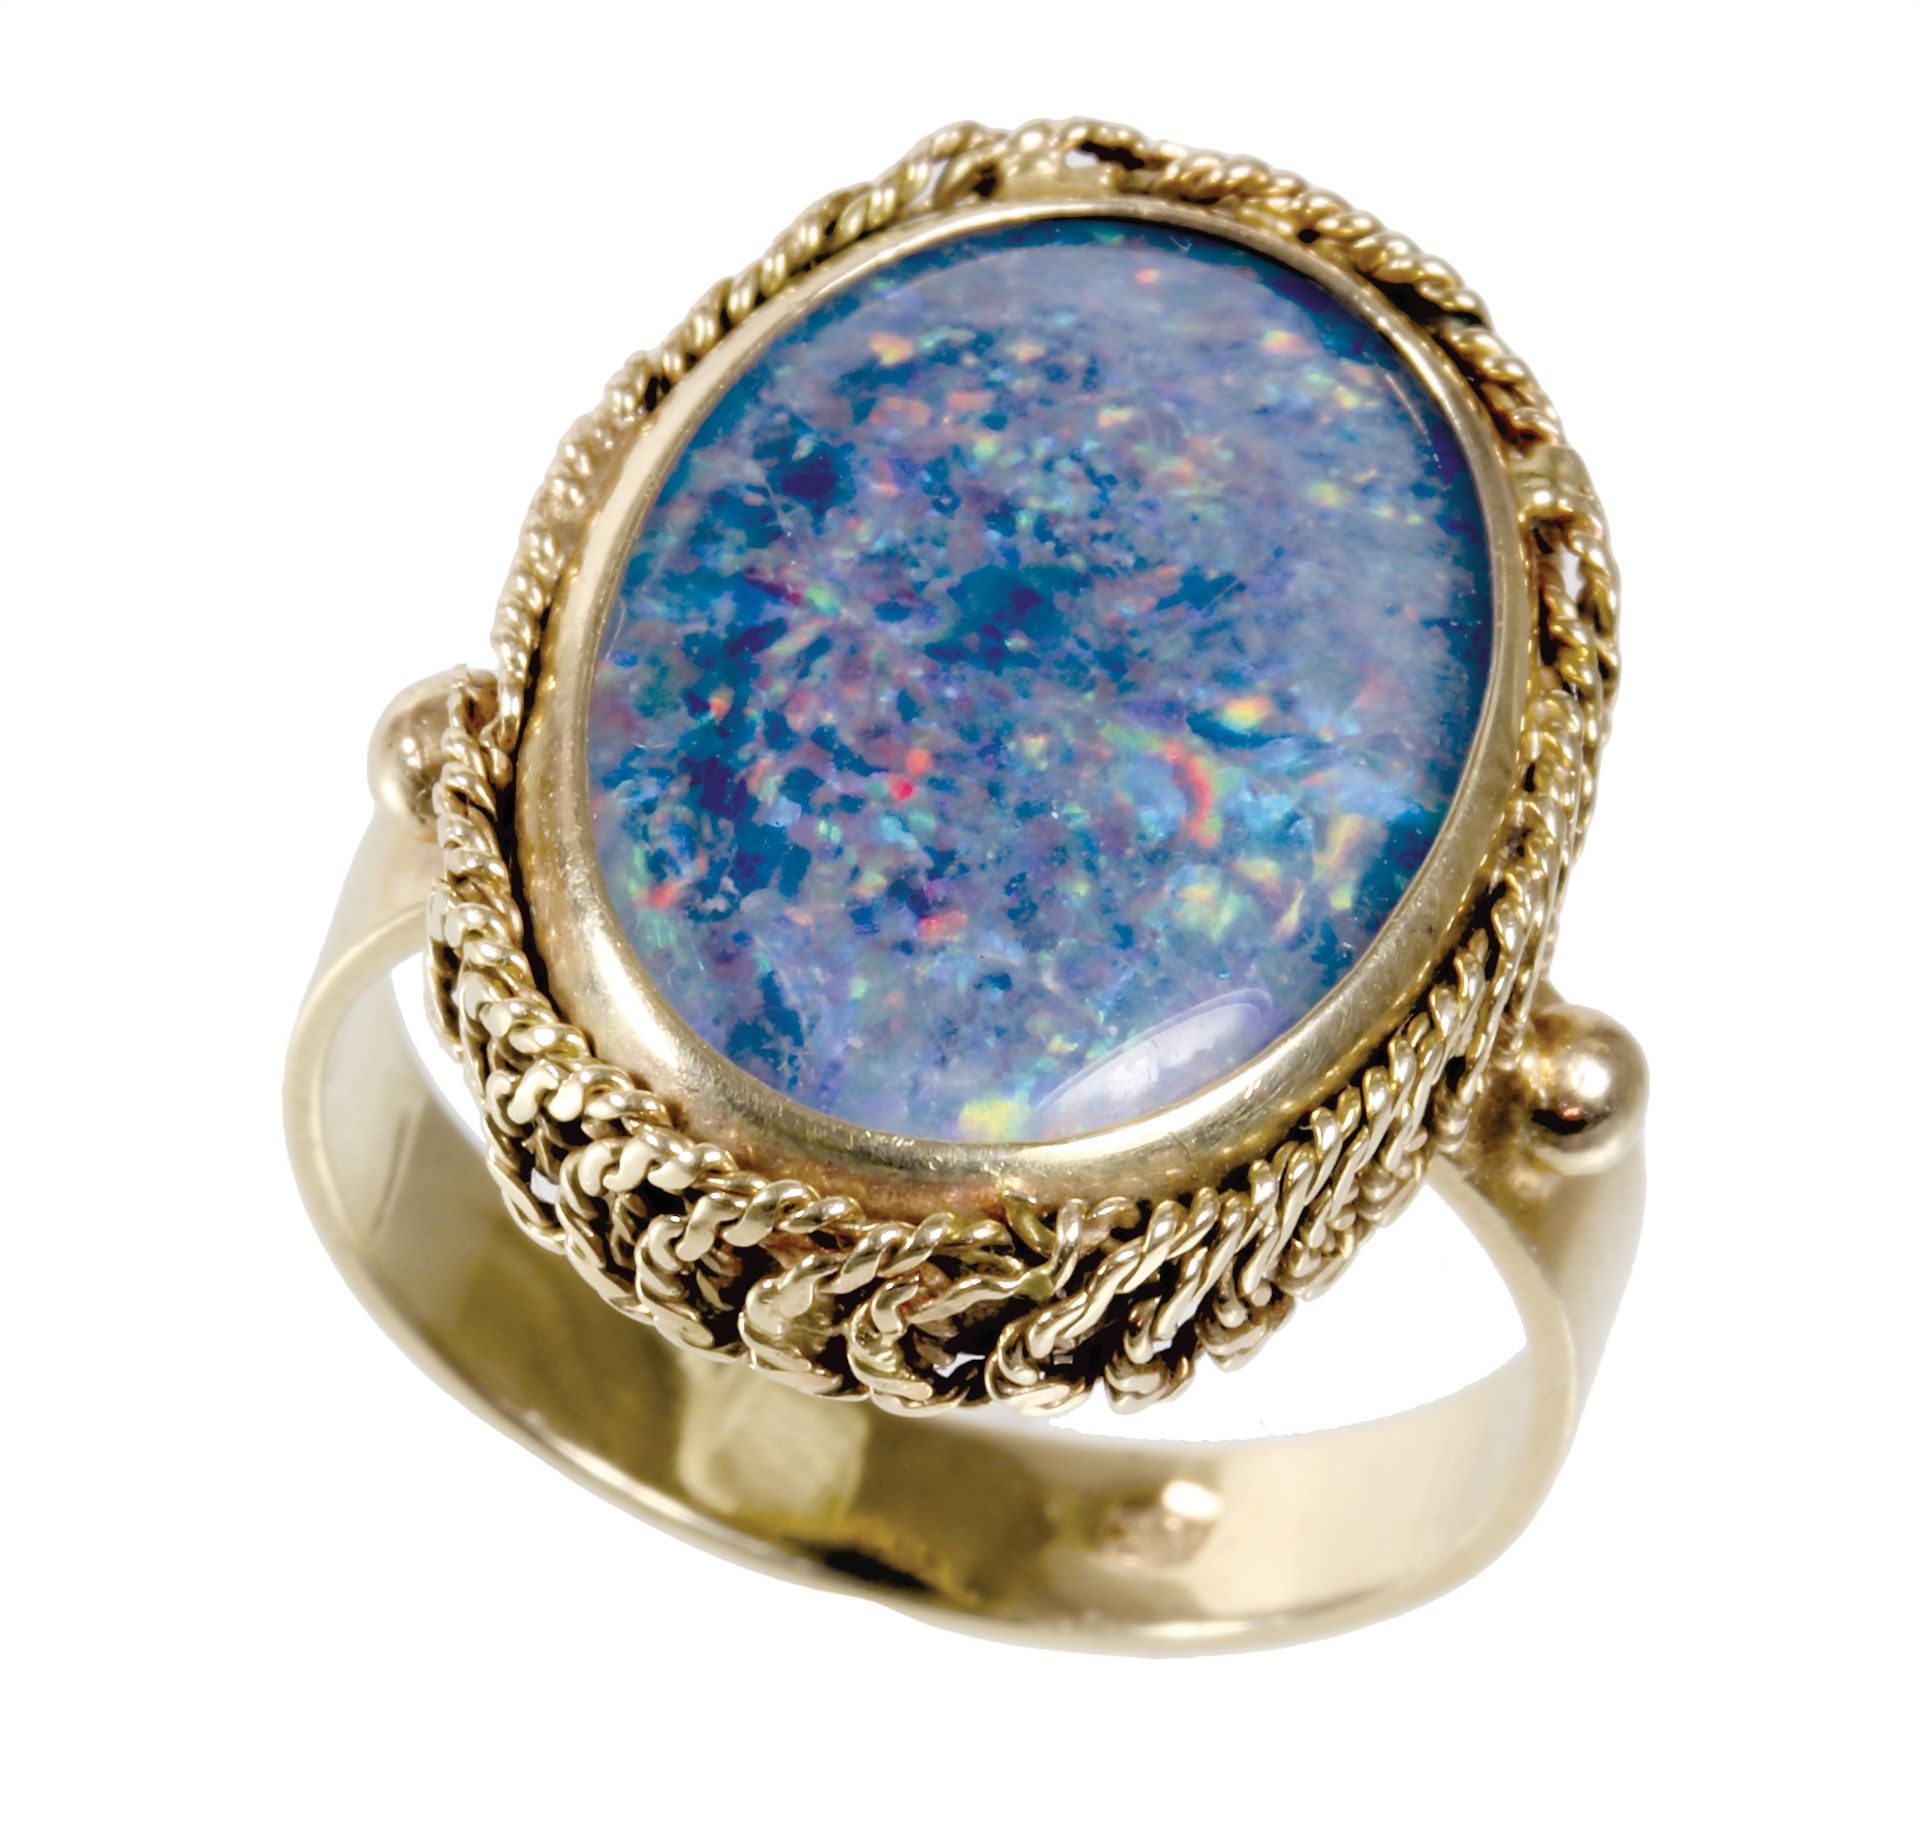 ring, yellow gold 585/000, opal doublet mainly blue, red and green color shades, ring head c. ...